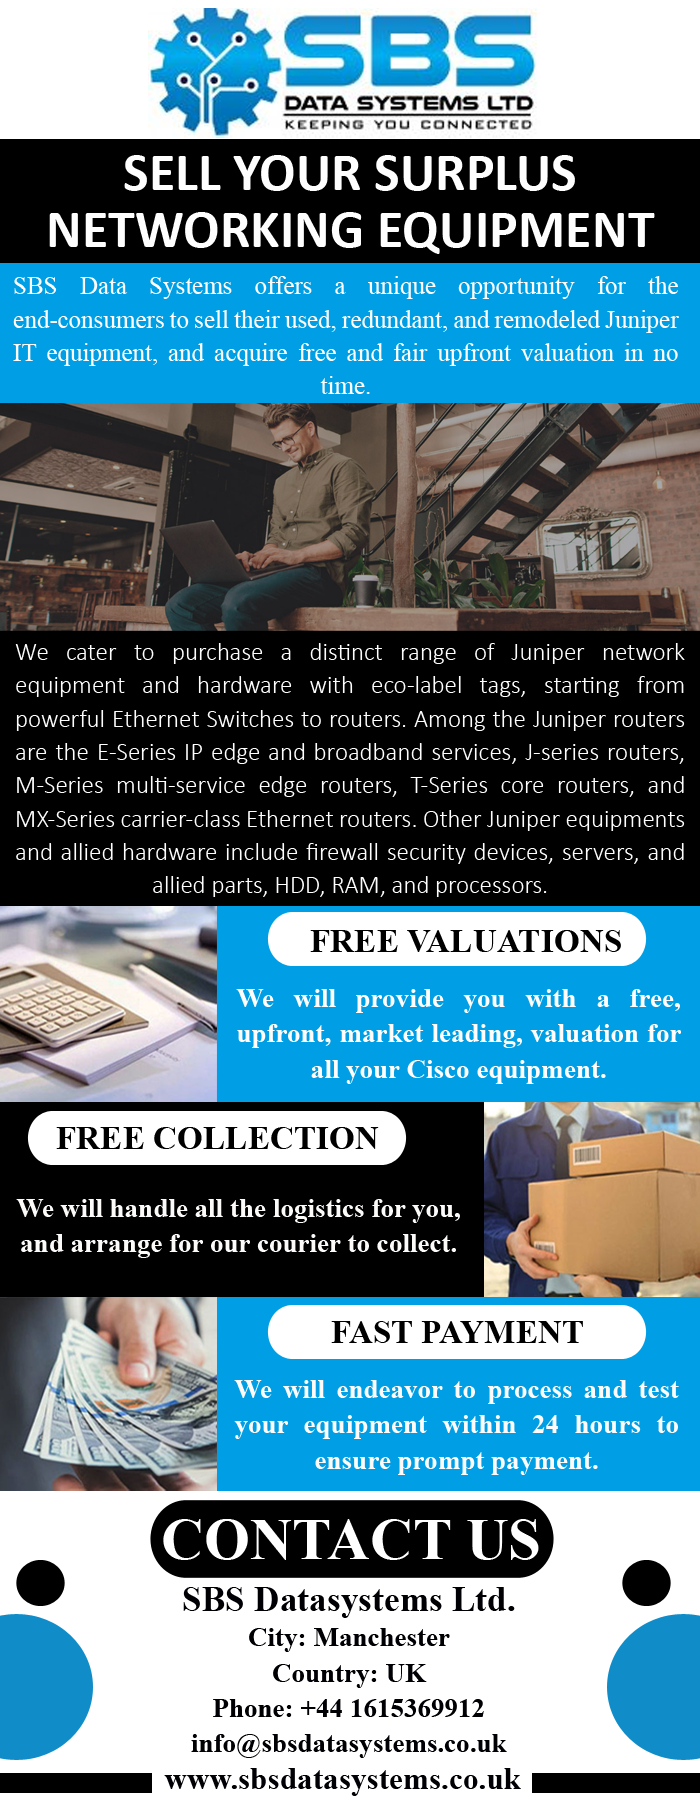 Sell your surplus networking equipment.png  by Sbsdatasystems